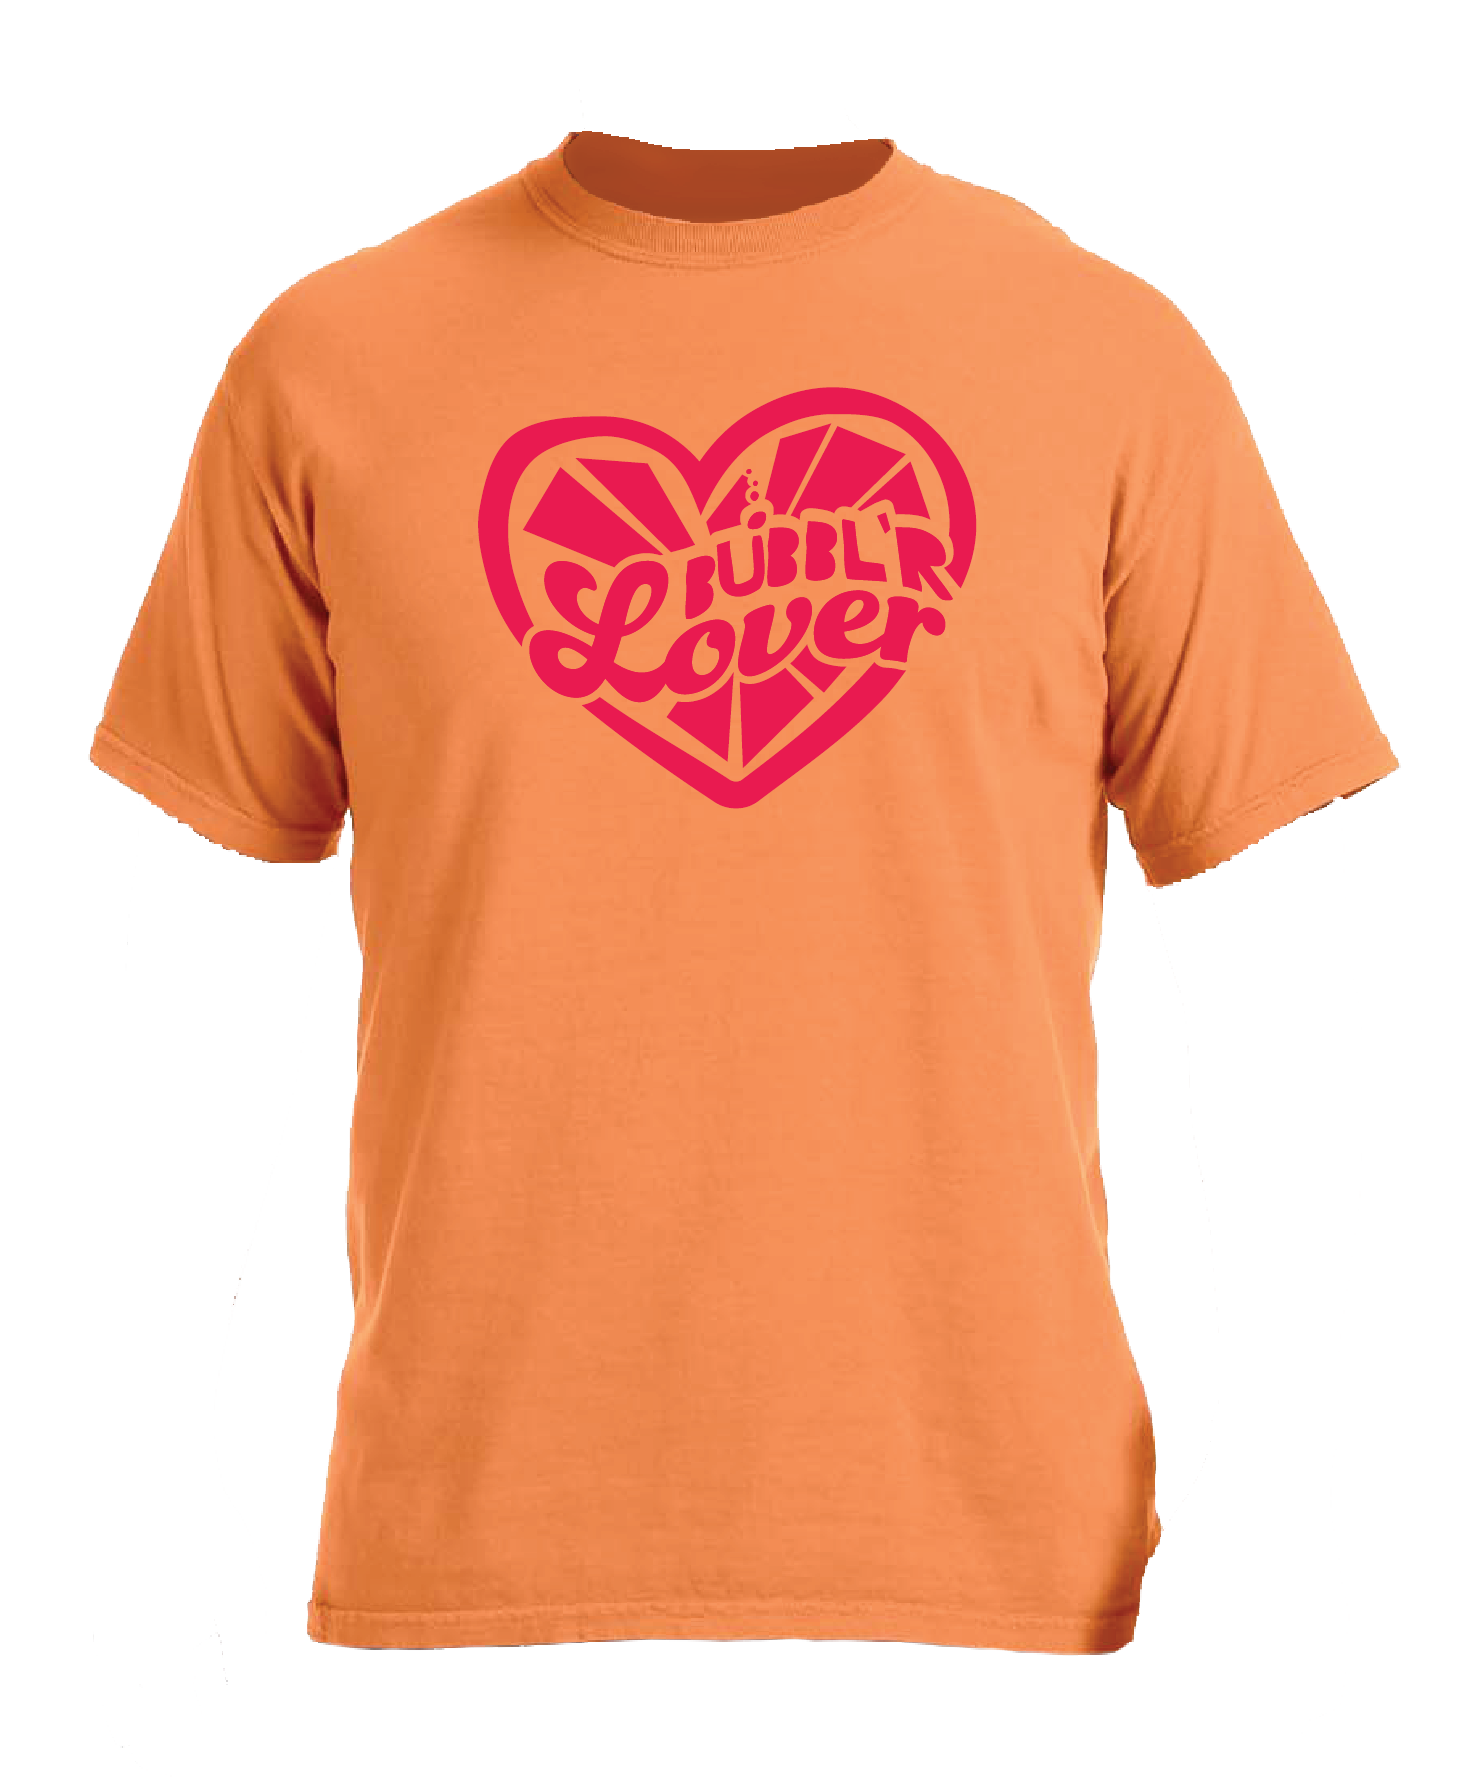 orange shirt with orange and red heart with pink lettering saying bubbl'r lover inside it